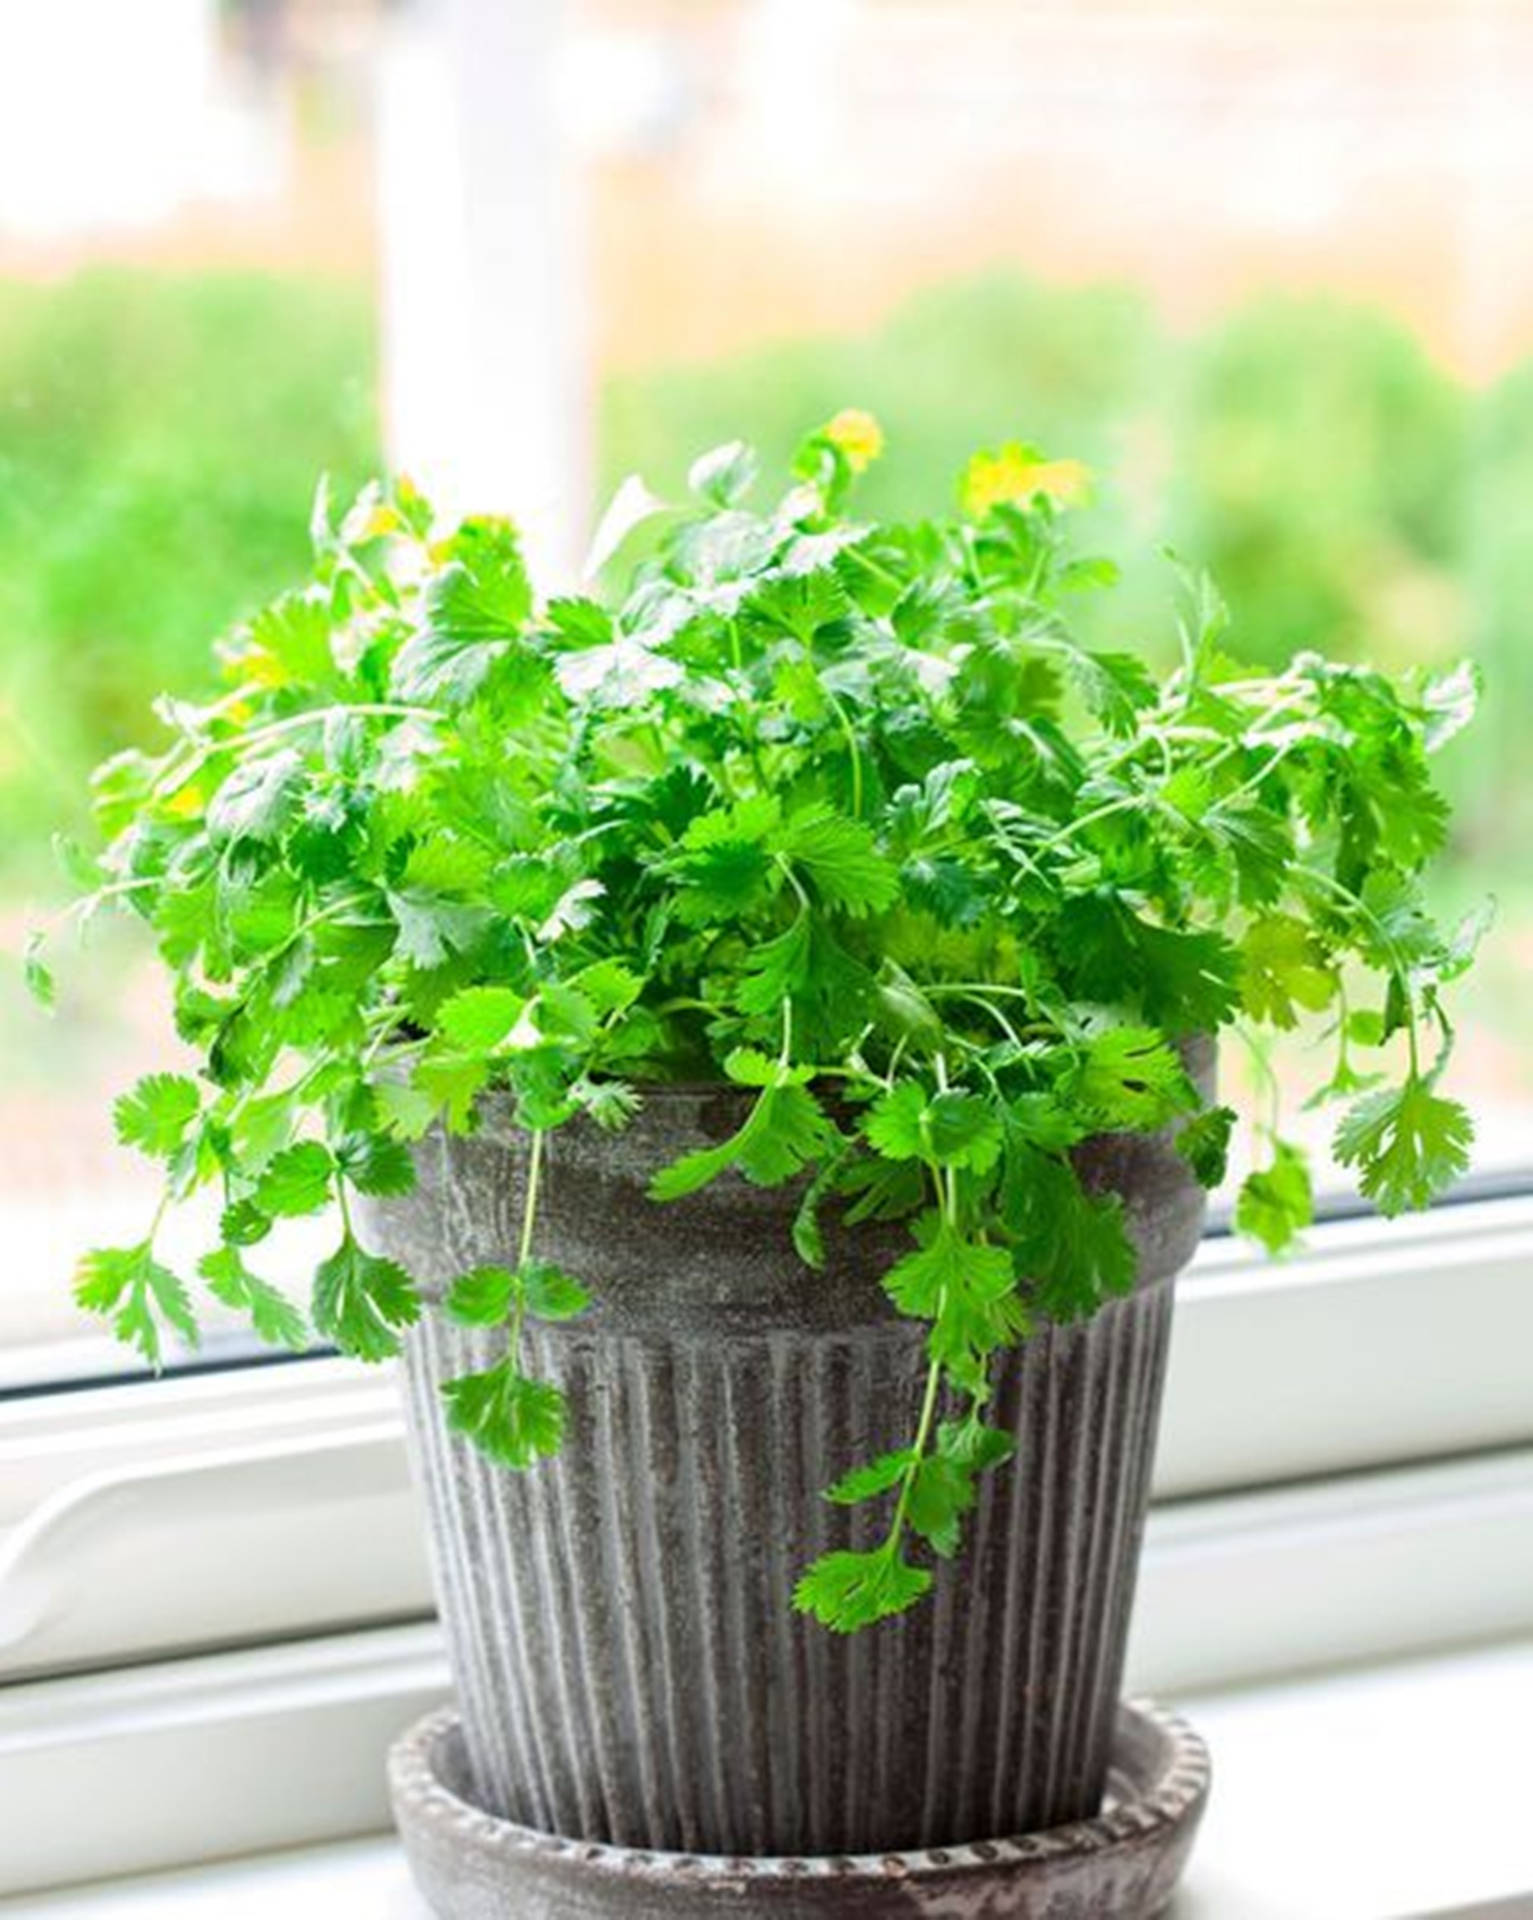 Thriving Potted Coriander by the Window Wallpaper